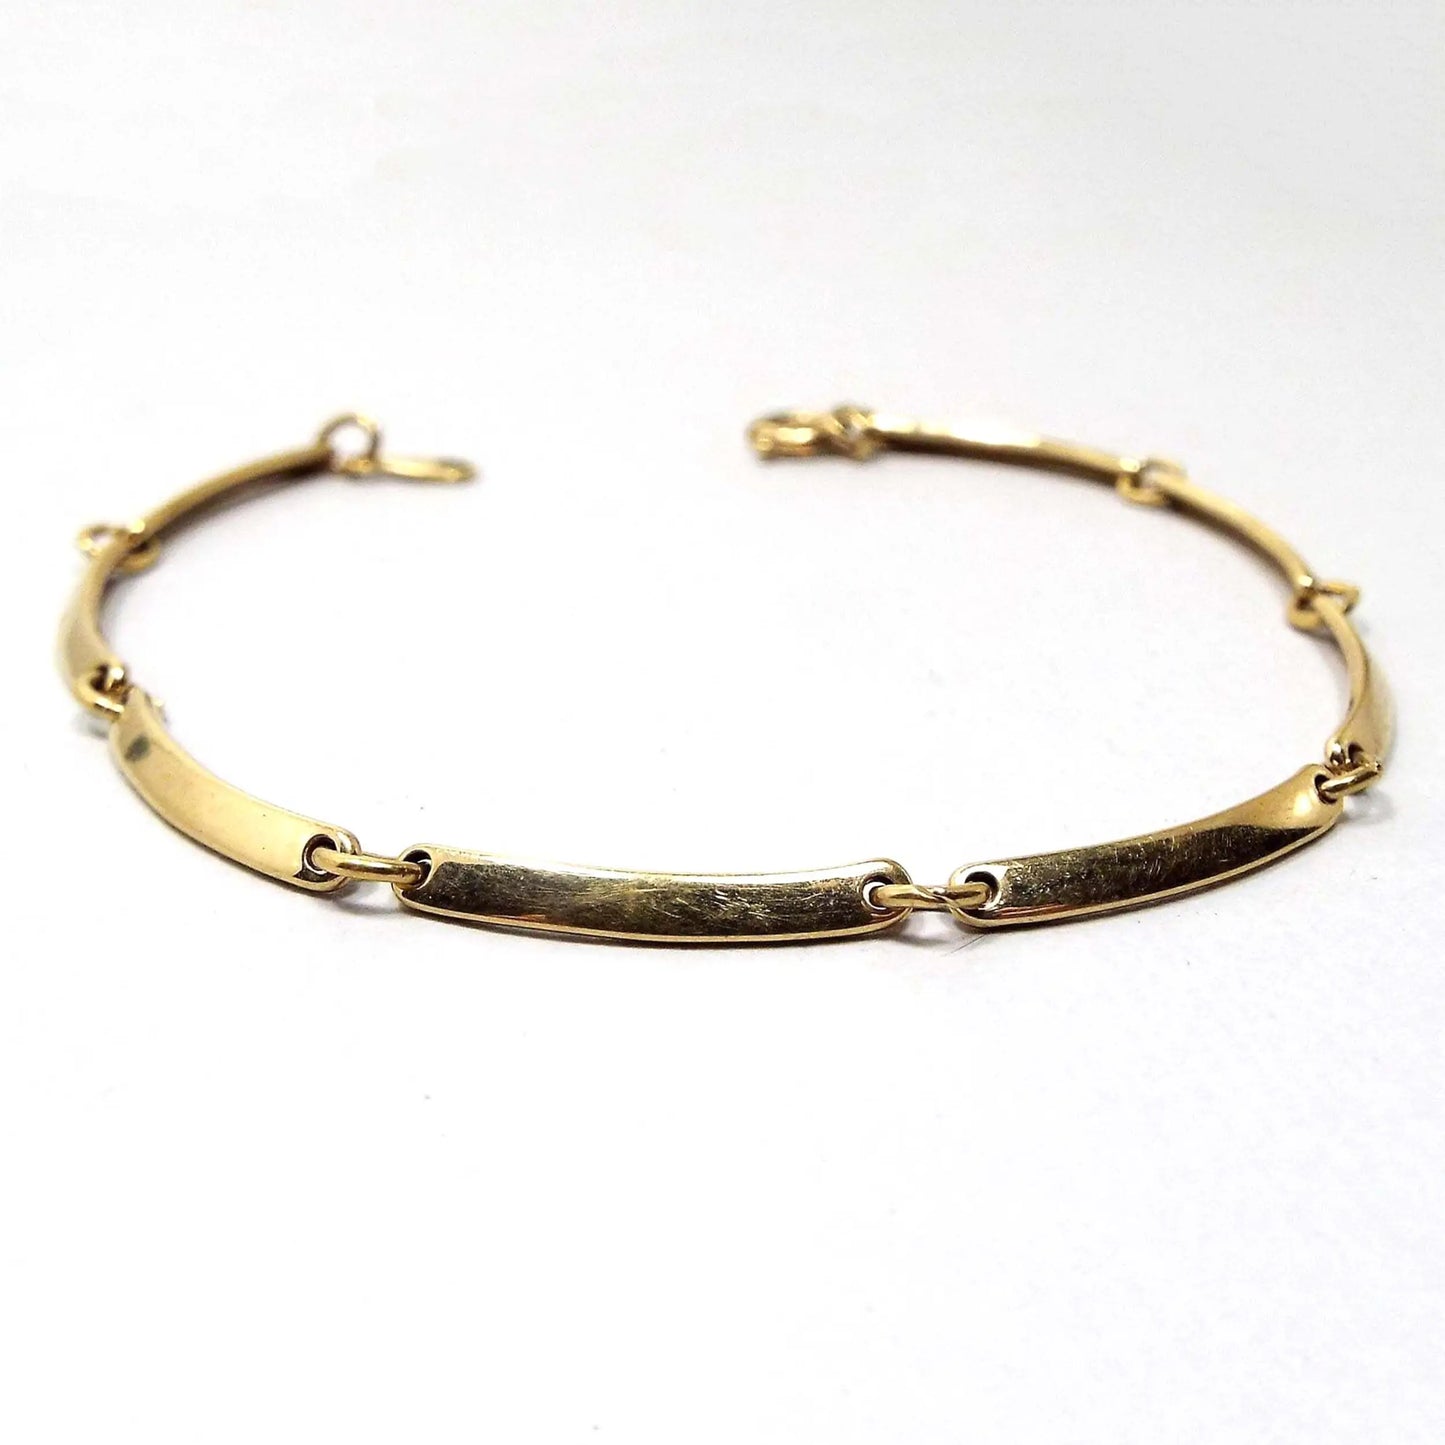 Angled view of the retro vintage Avon link bracelet. The metal is gold tone in color. The links are flattened style long slightly curved oval links held together with metal jump rings. There is a round spring ring clasp at the end.